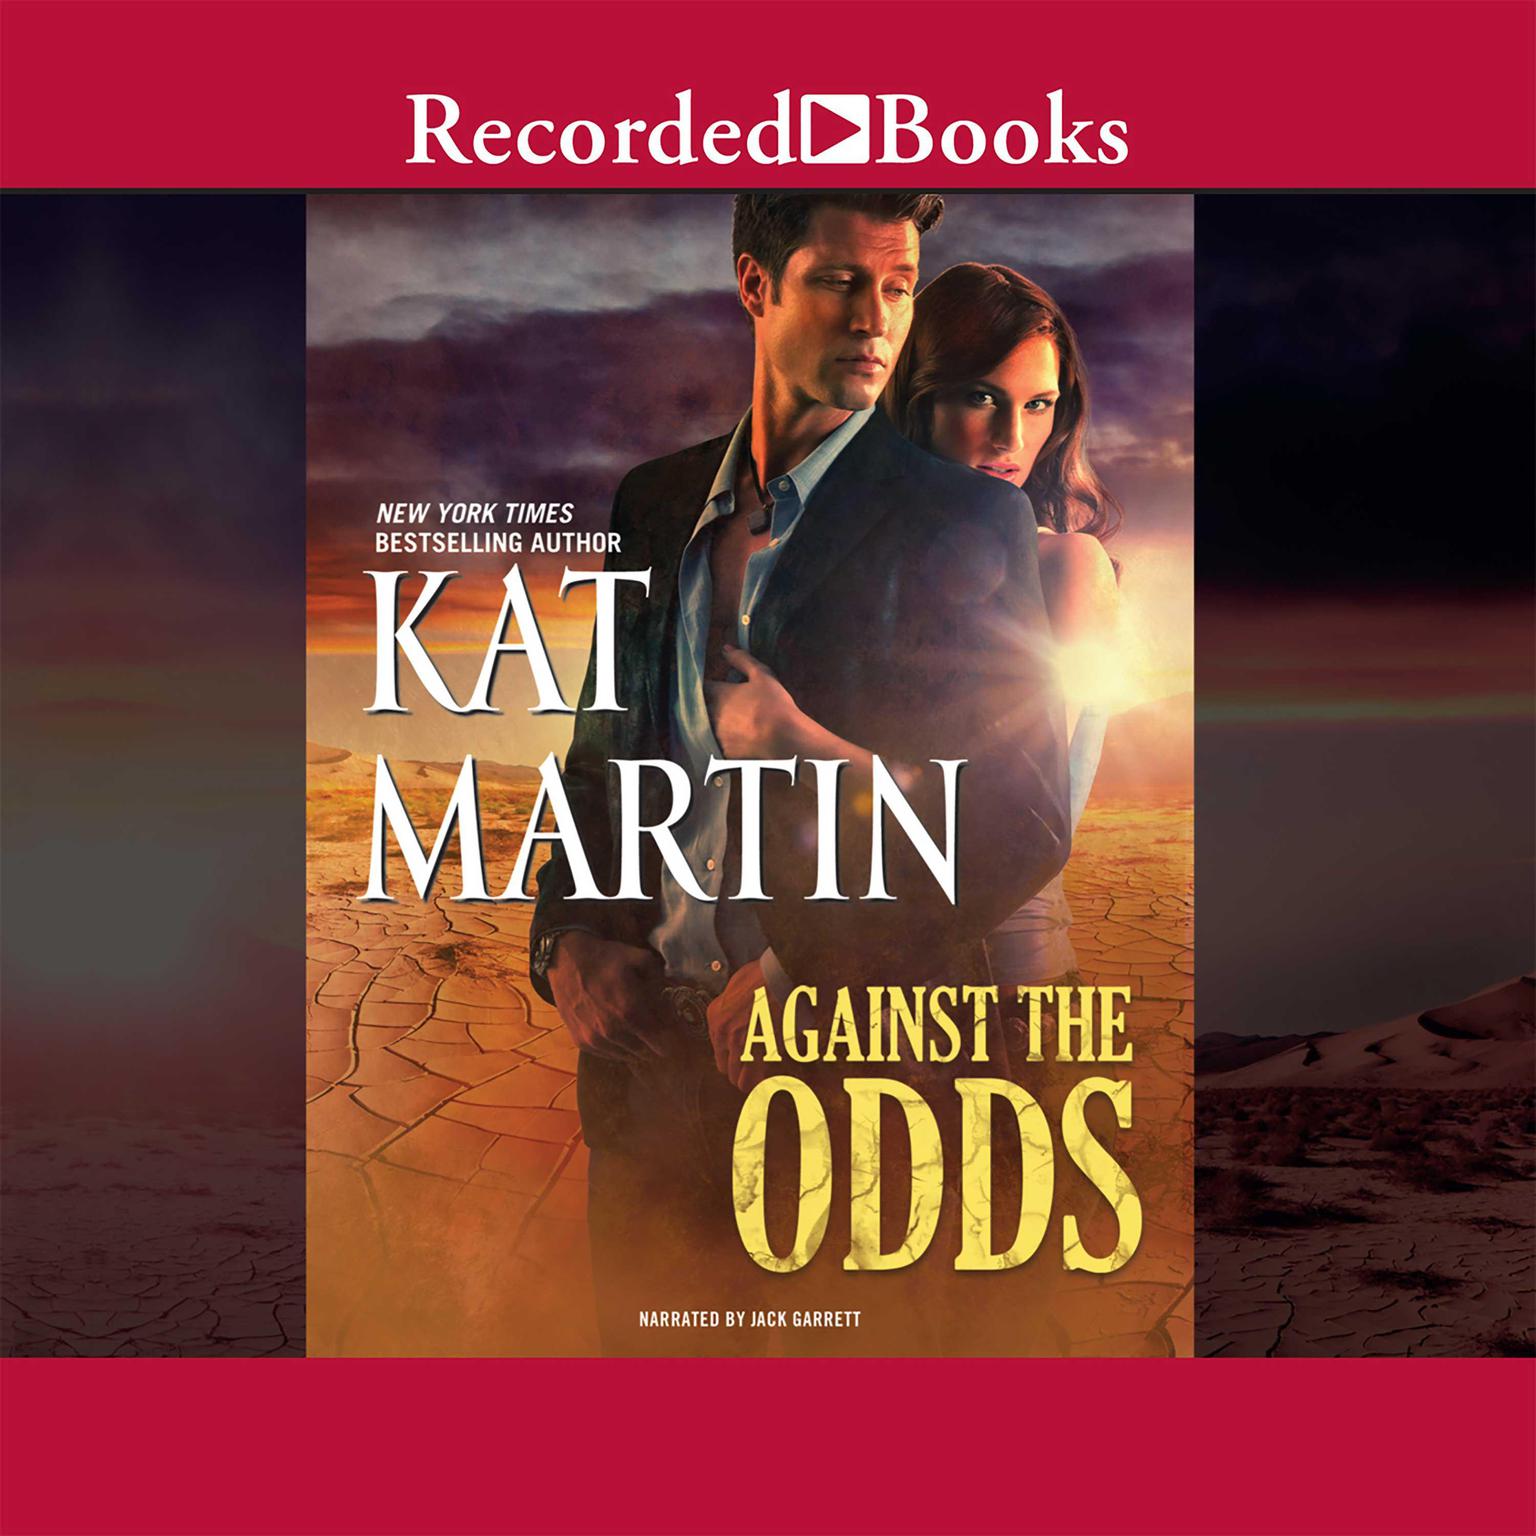 Against the Odds Audiobook, by Kat Martin